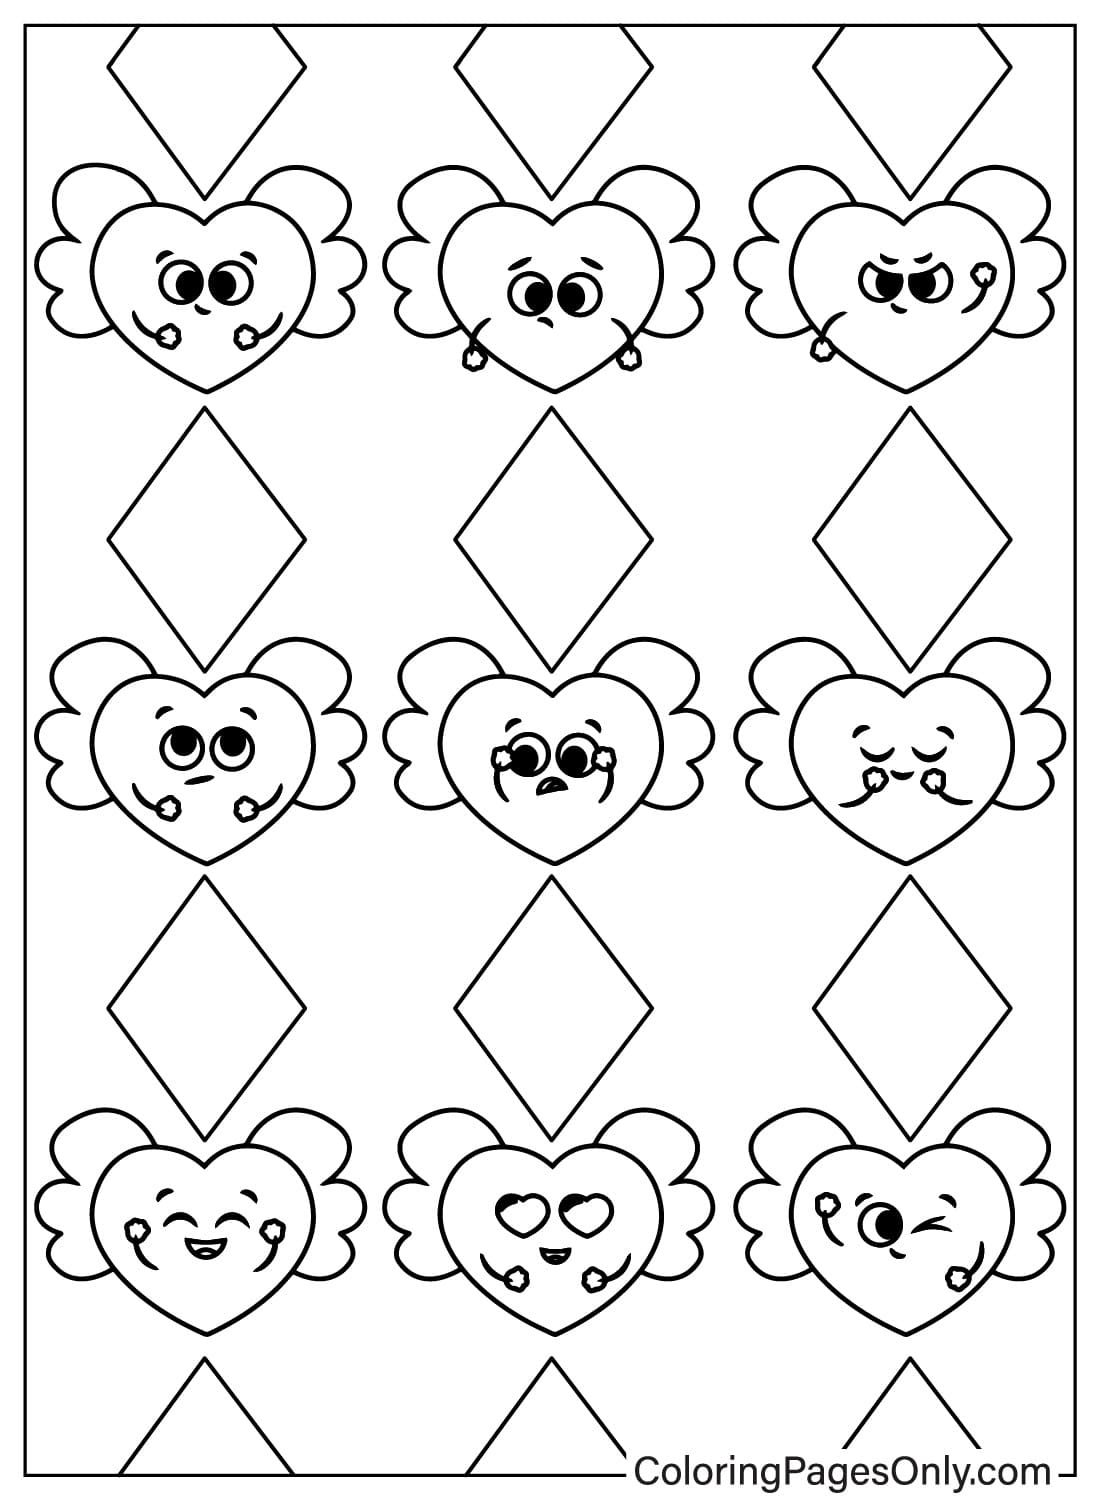 Free Printable Heart Coloring Page